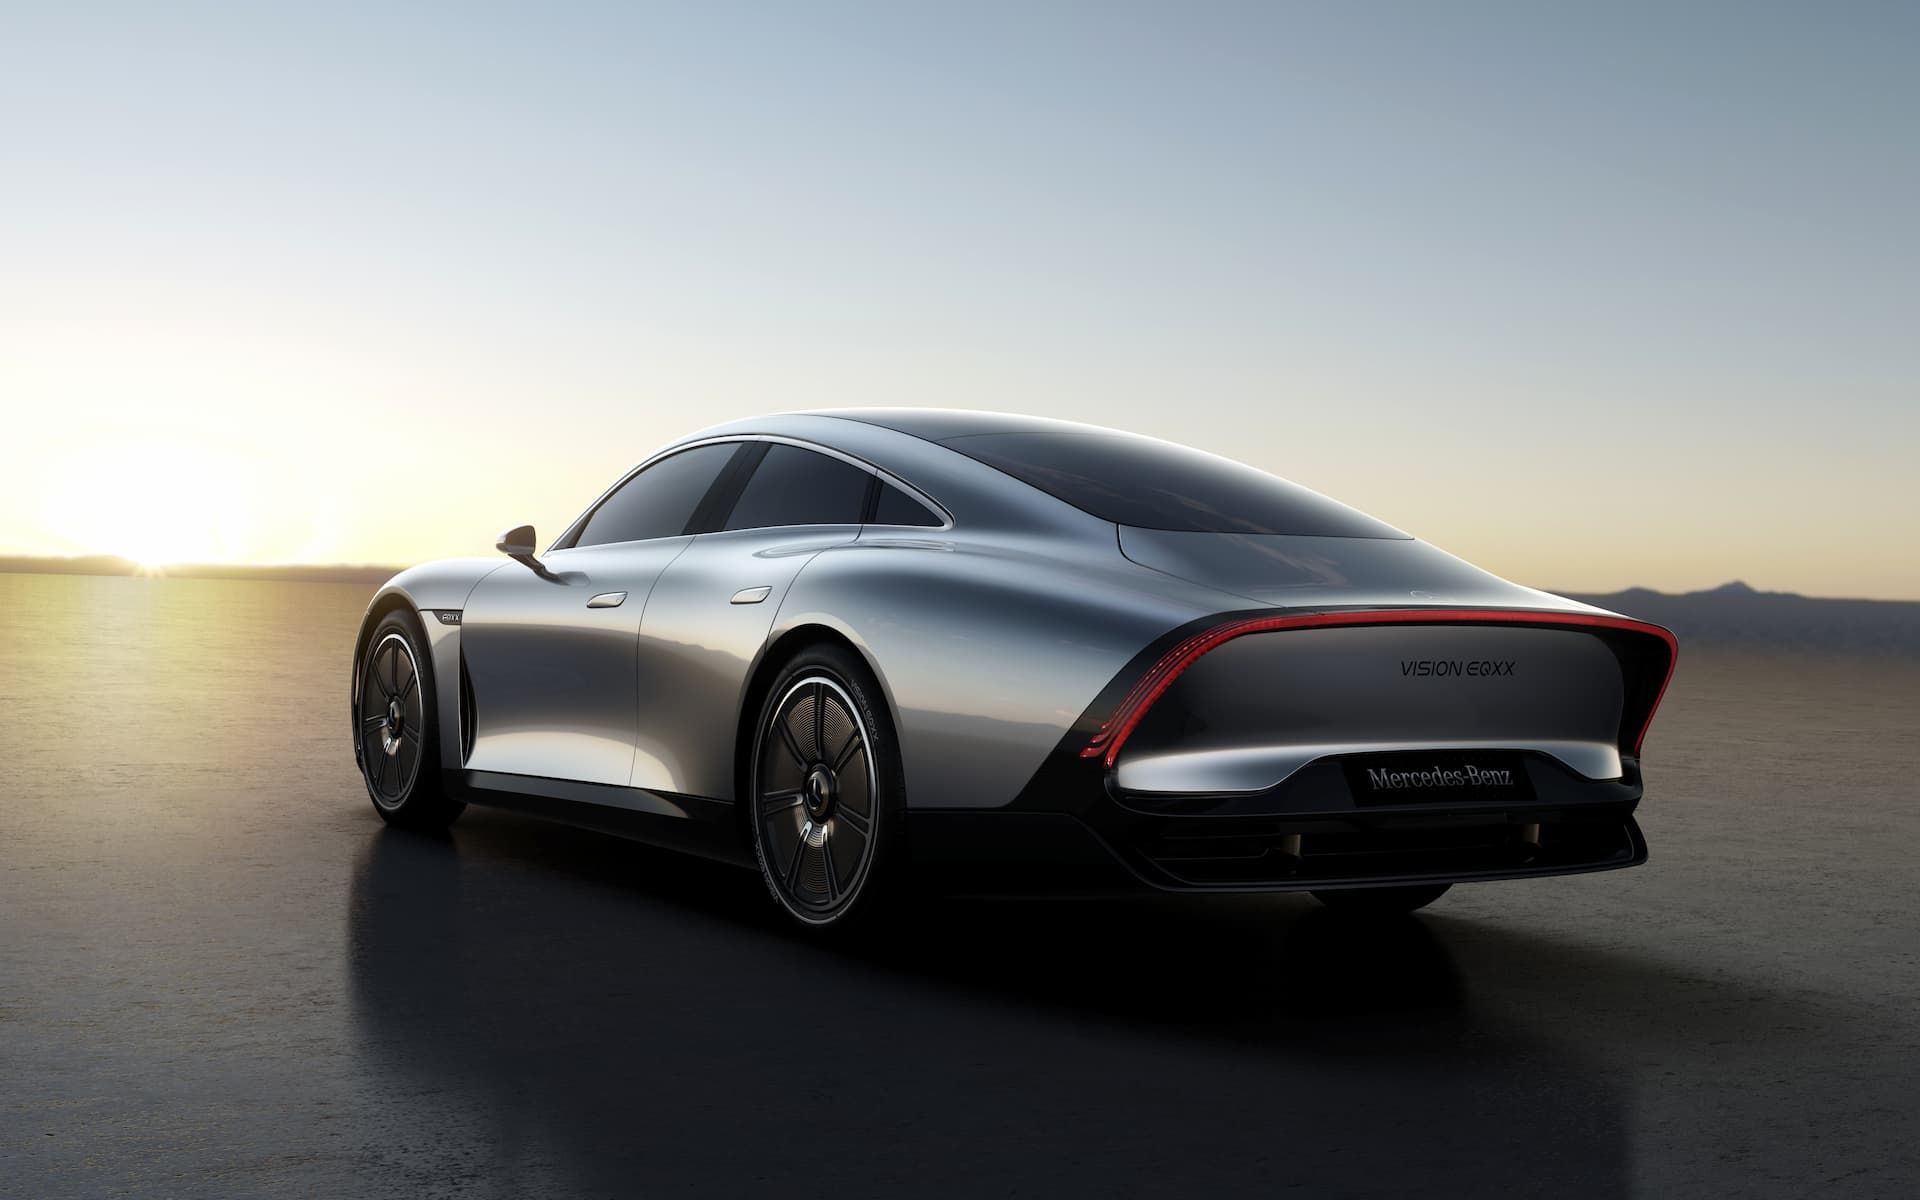 Long-tail rear of futuristic Mercedes-Benz EQXX electric vehicle concept